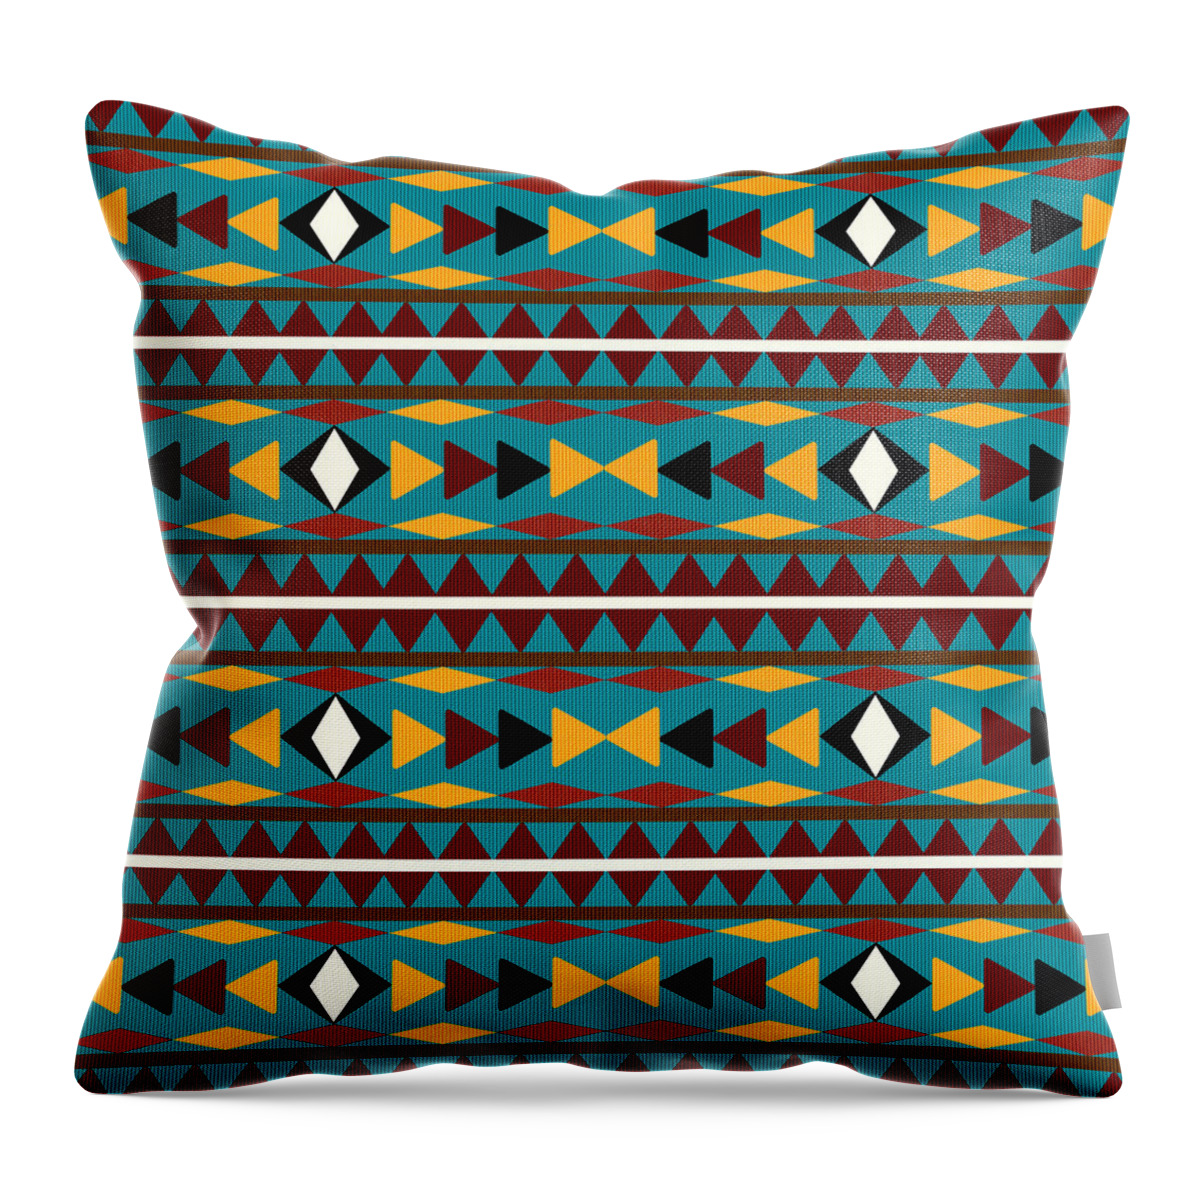 Navajo Throw Pillow featuring the mixed media Navajo Teal Pattern by Christina Rollo